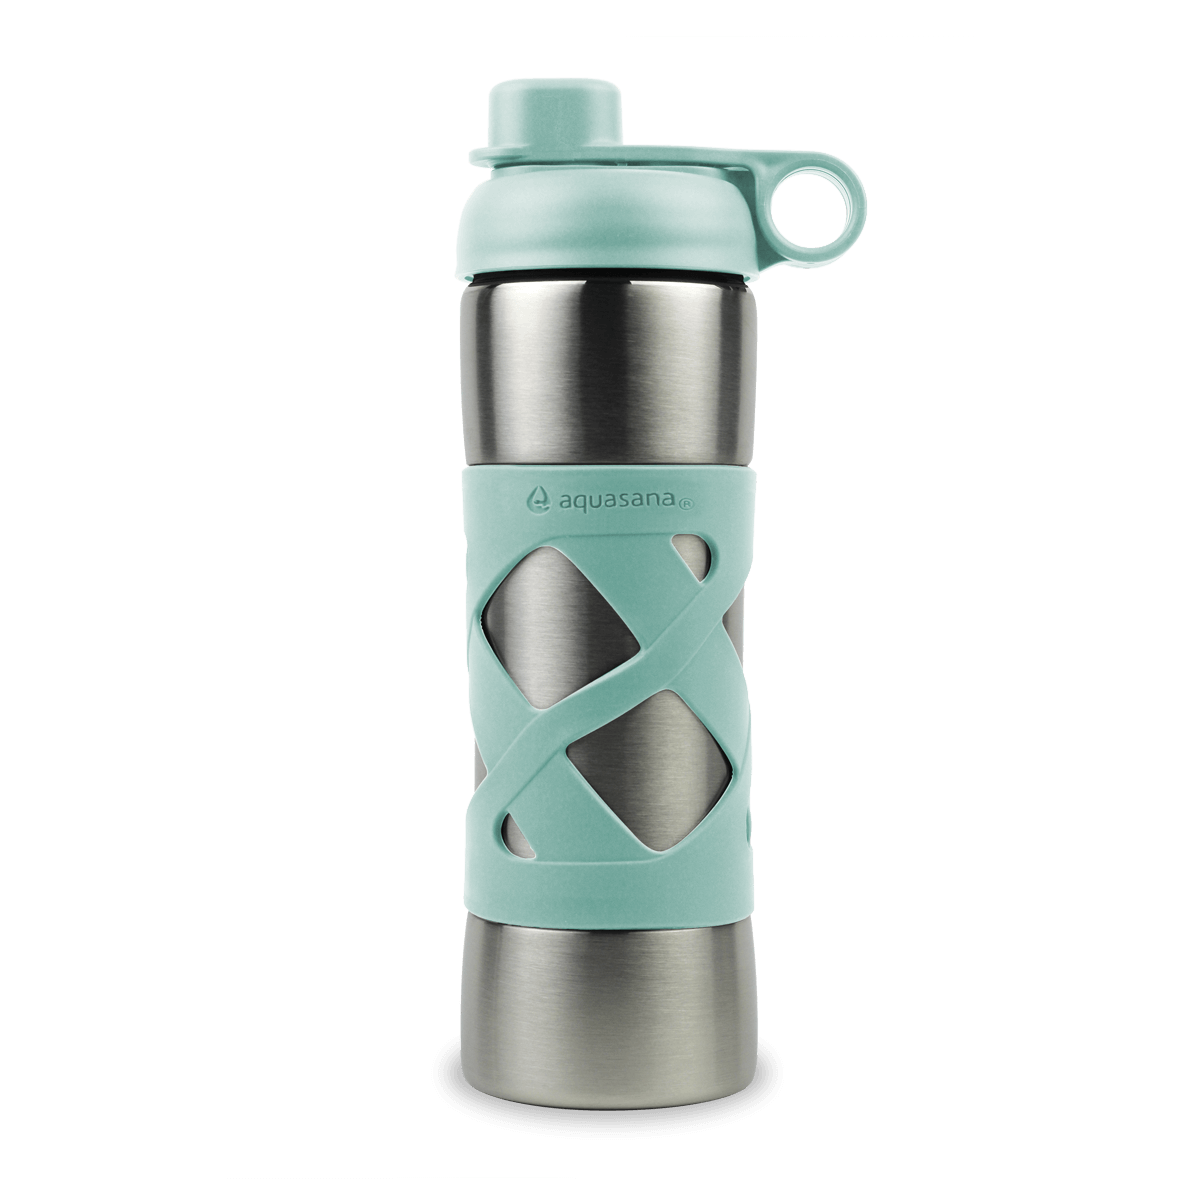 Aquasana Active 17 oz. Clean Water Bottle with Filter, Insulated Stainless Steel, Glacier JJ329085